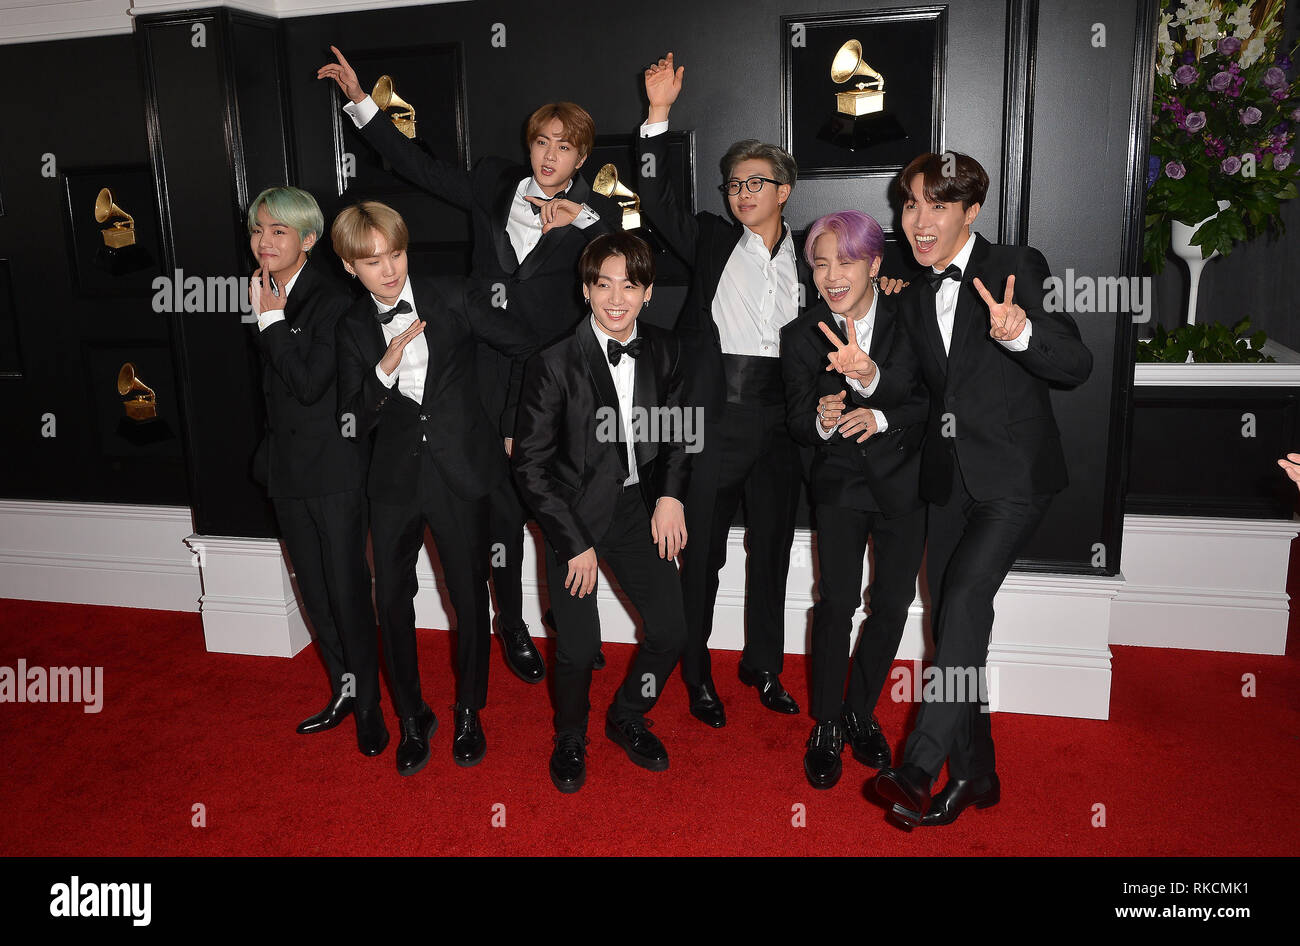 What BTS's V, RM, Suga, Jimin, Jungkook, Jin, and J-Hope Wore on Grammys  2019 Red Carpet